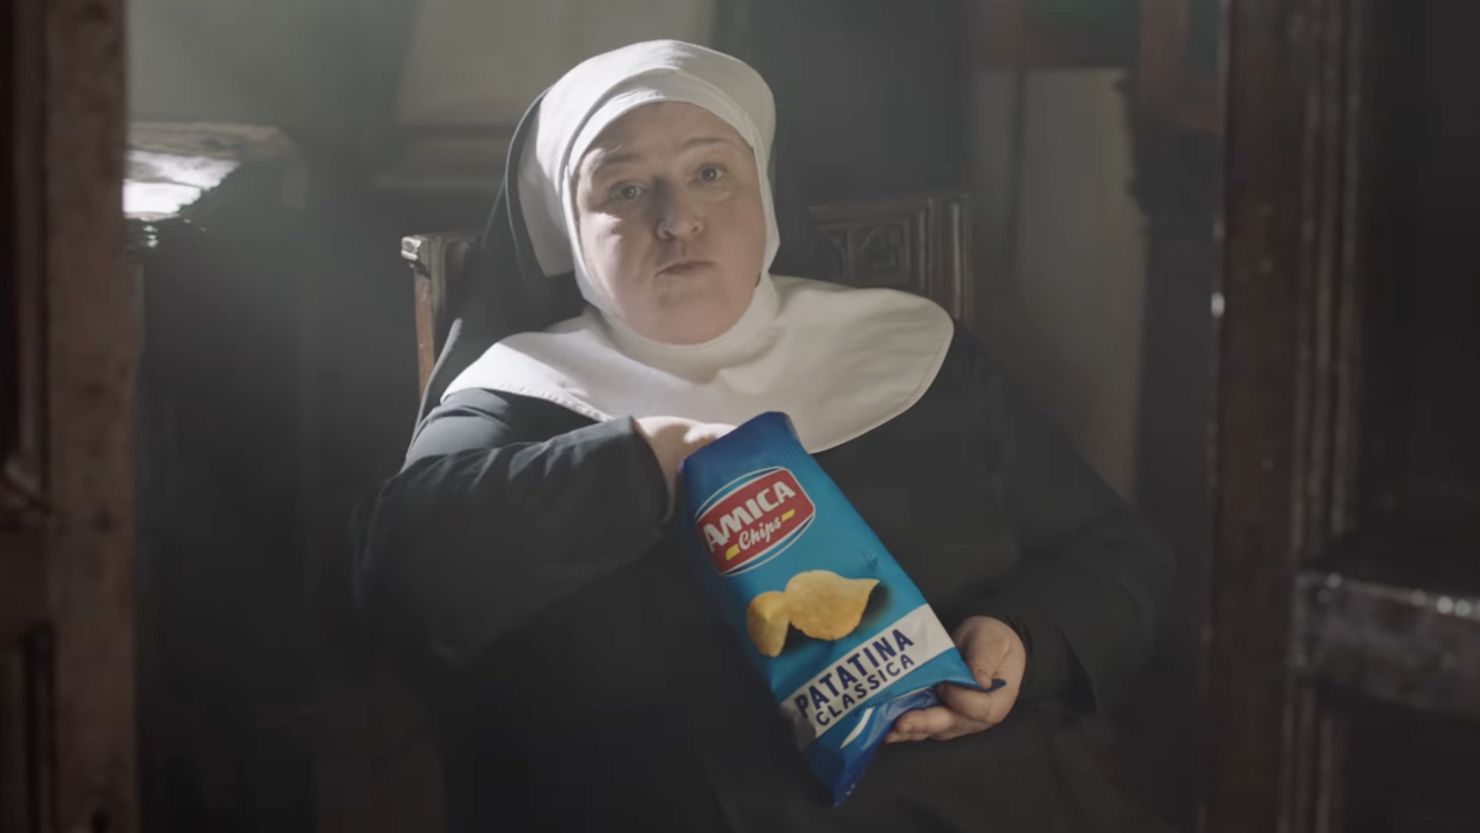 A screengrab from the commercial, which has been criticized by Catholics.